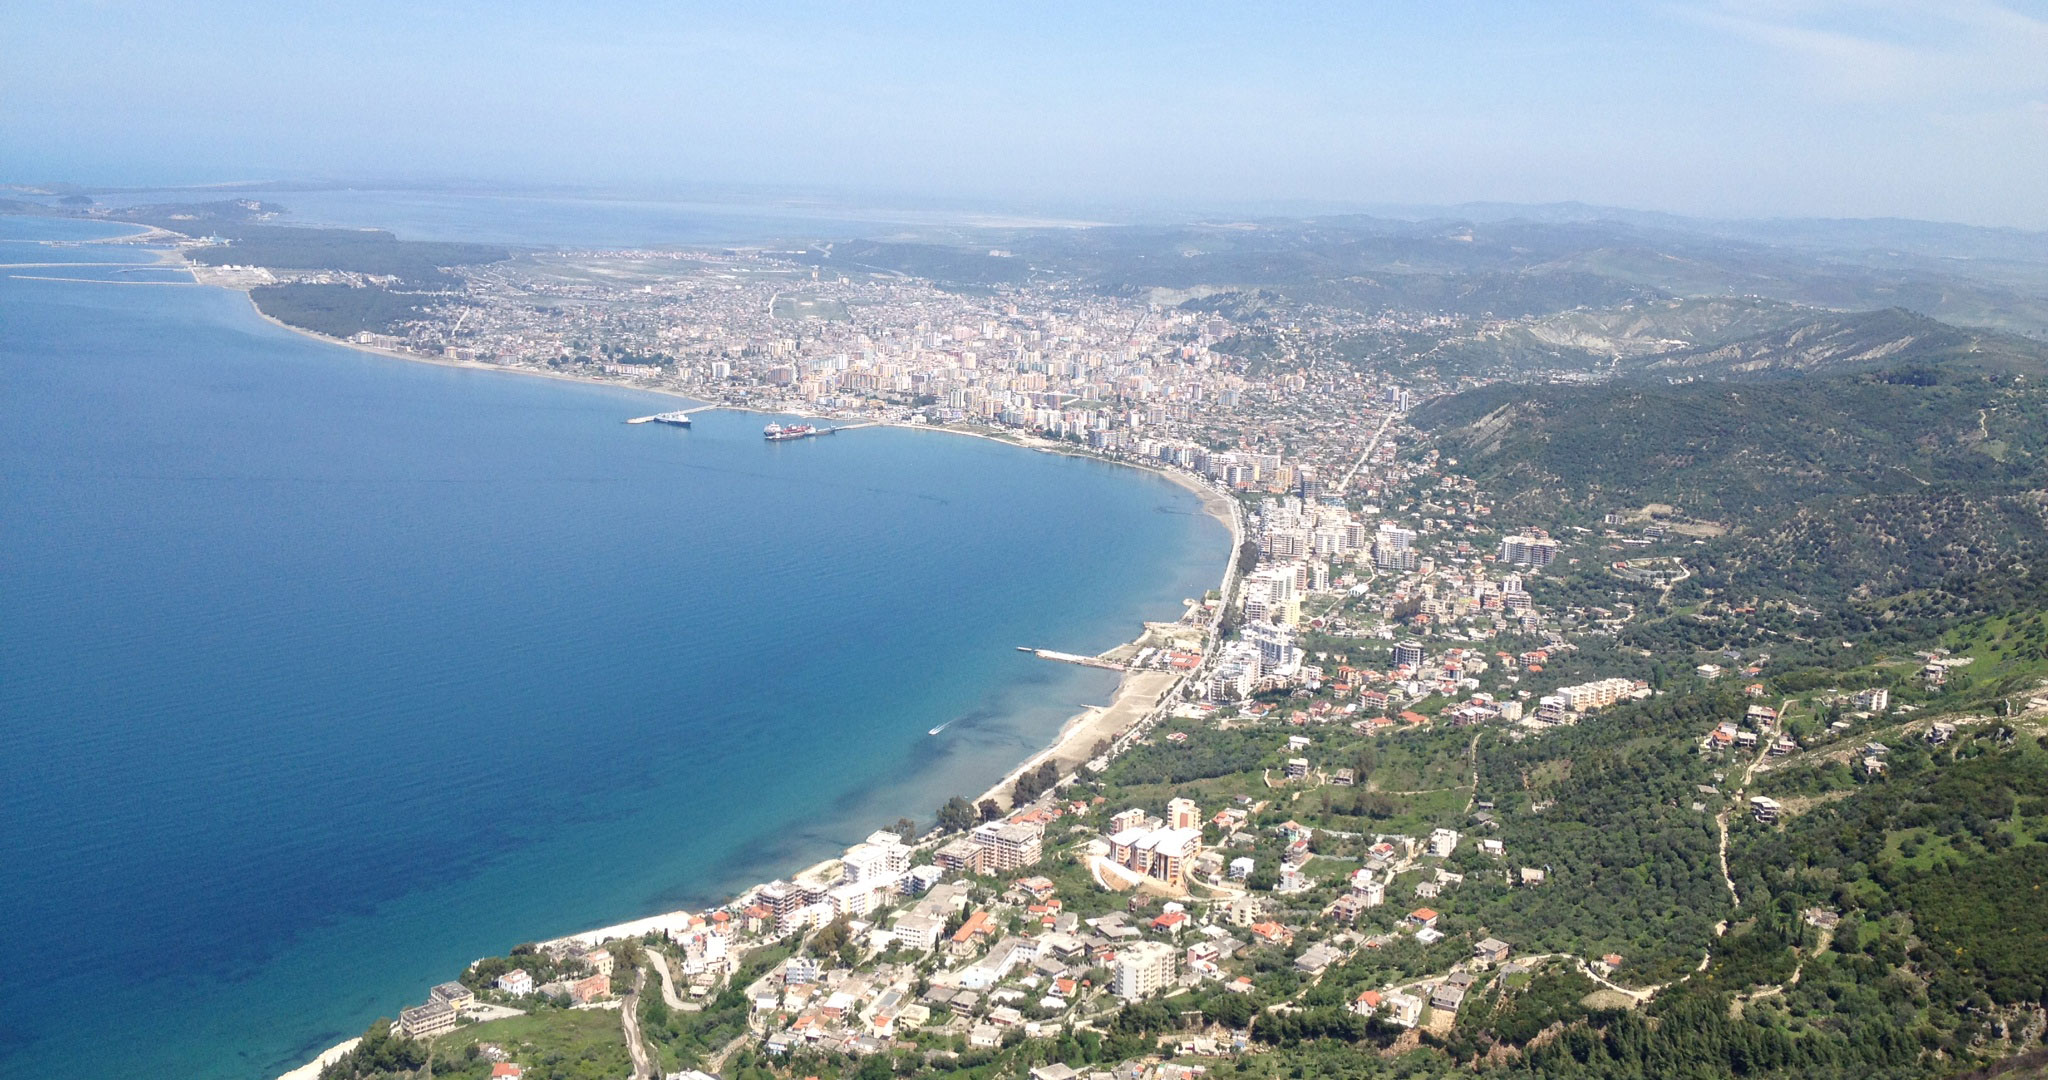 Vlora from the sky